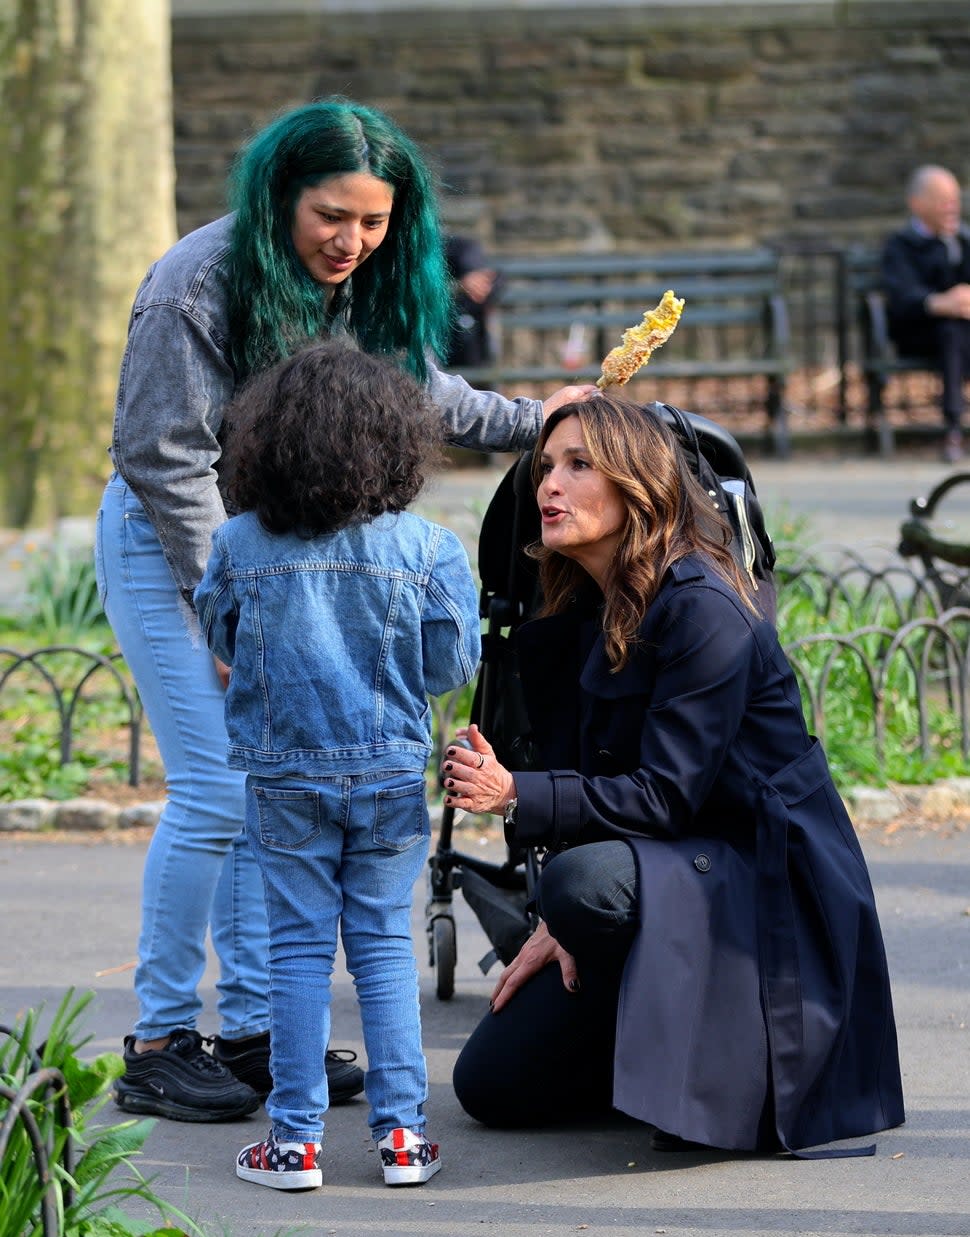 Mariska Hargitay pictured taking a break from filming 'Law and Order: SVU' to help a crying child